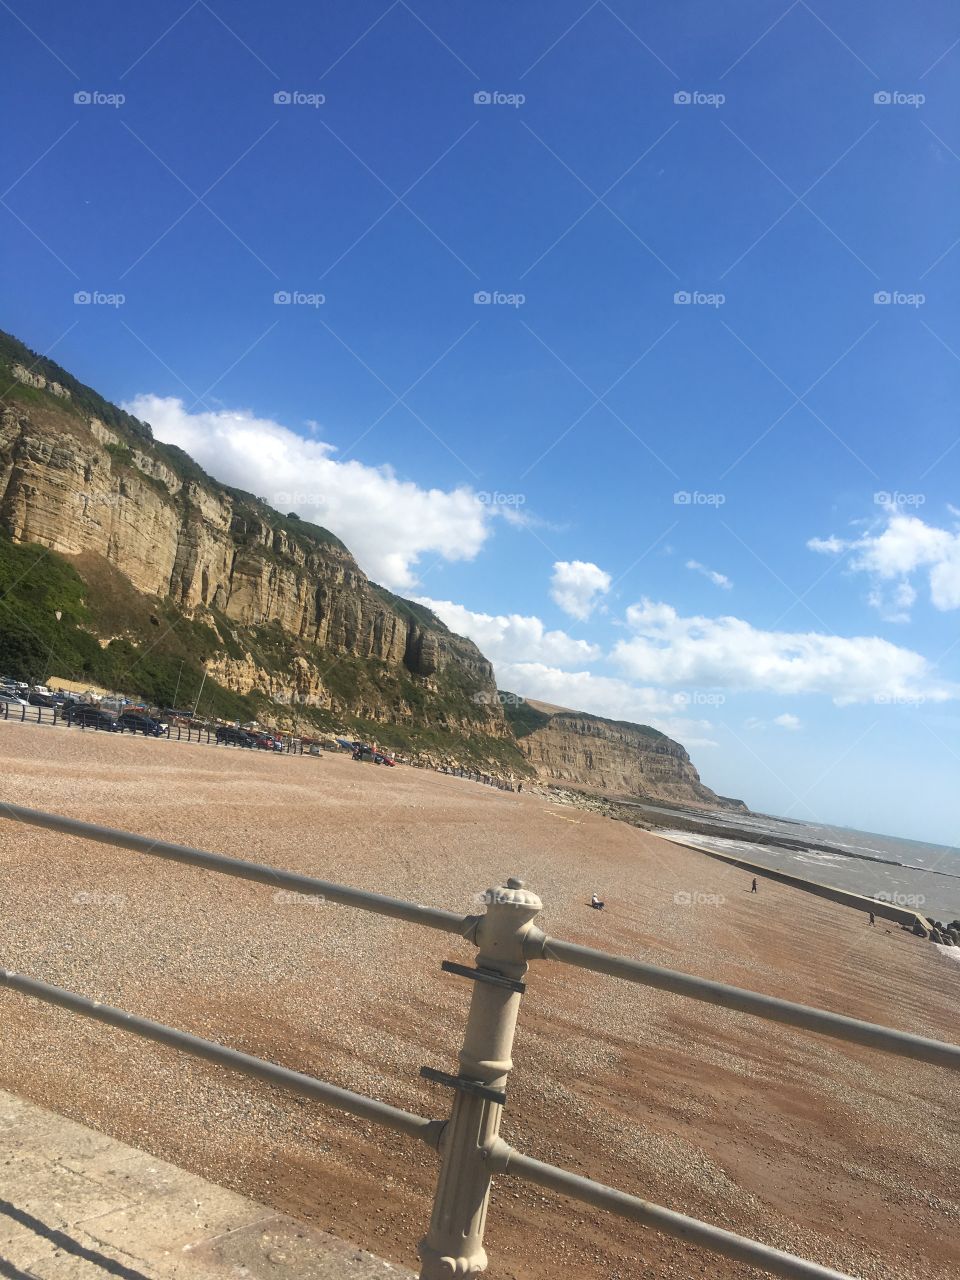 beautiful shot of the cliffs in hastings, amazing scenery that would look amazing on a canvas or in a frame. Buy my images for great satisfaction